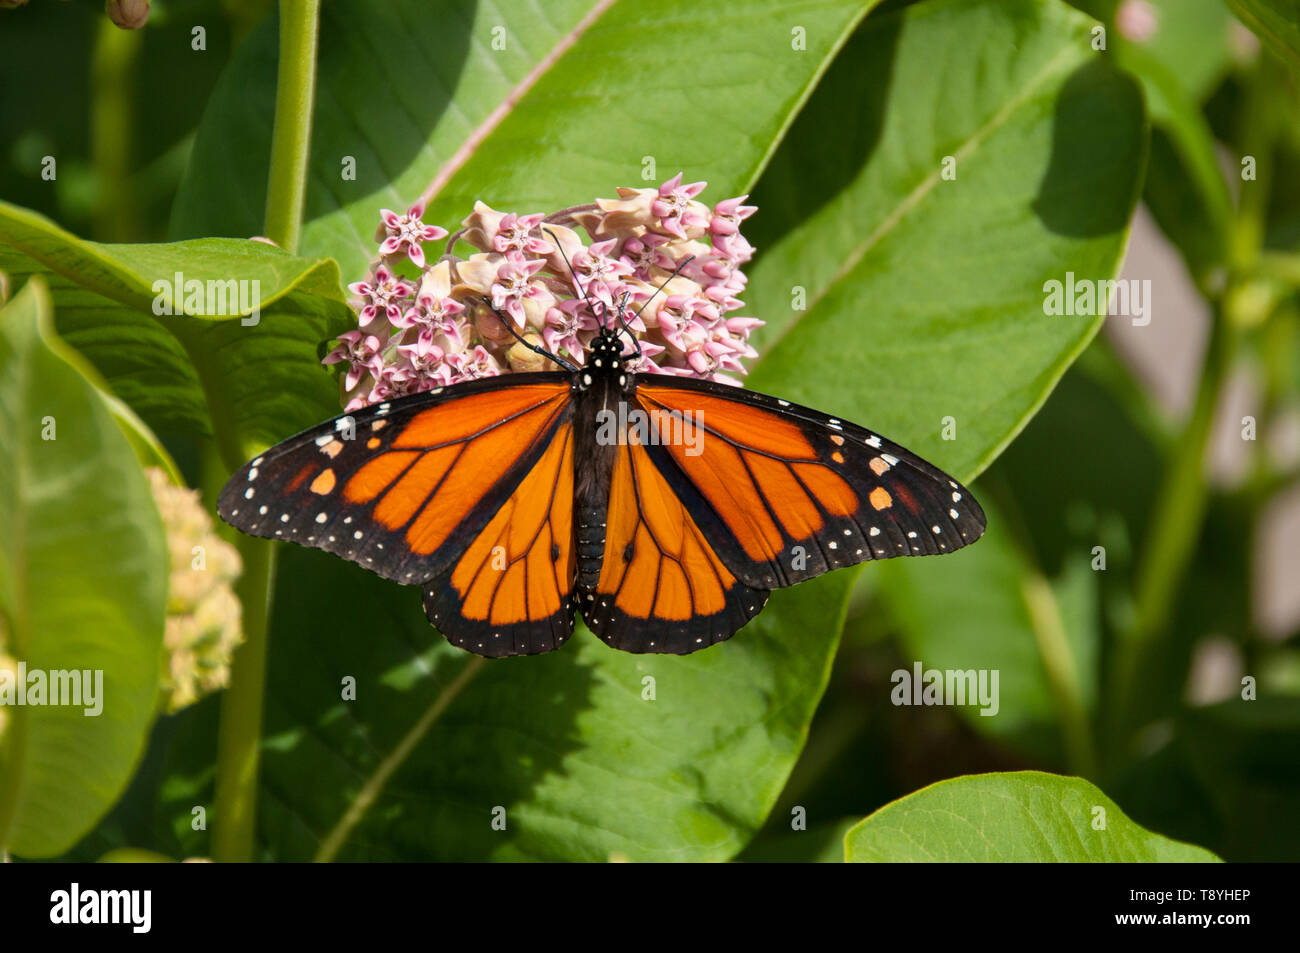 Monarch butterfly (Danaus plexippus) on Milkweed plant (Asclepias syriaca), a latex producting toxic plant, both at the limit of their northern range near Thunder Bay, Ontario, Canada. Stock Photo